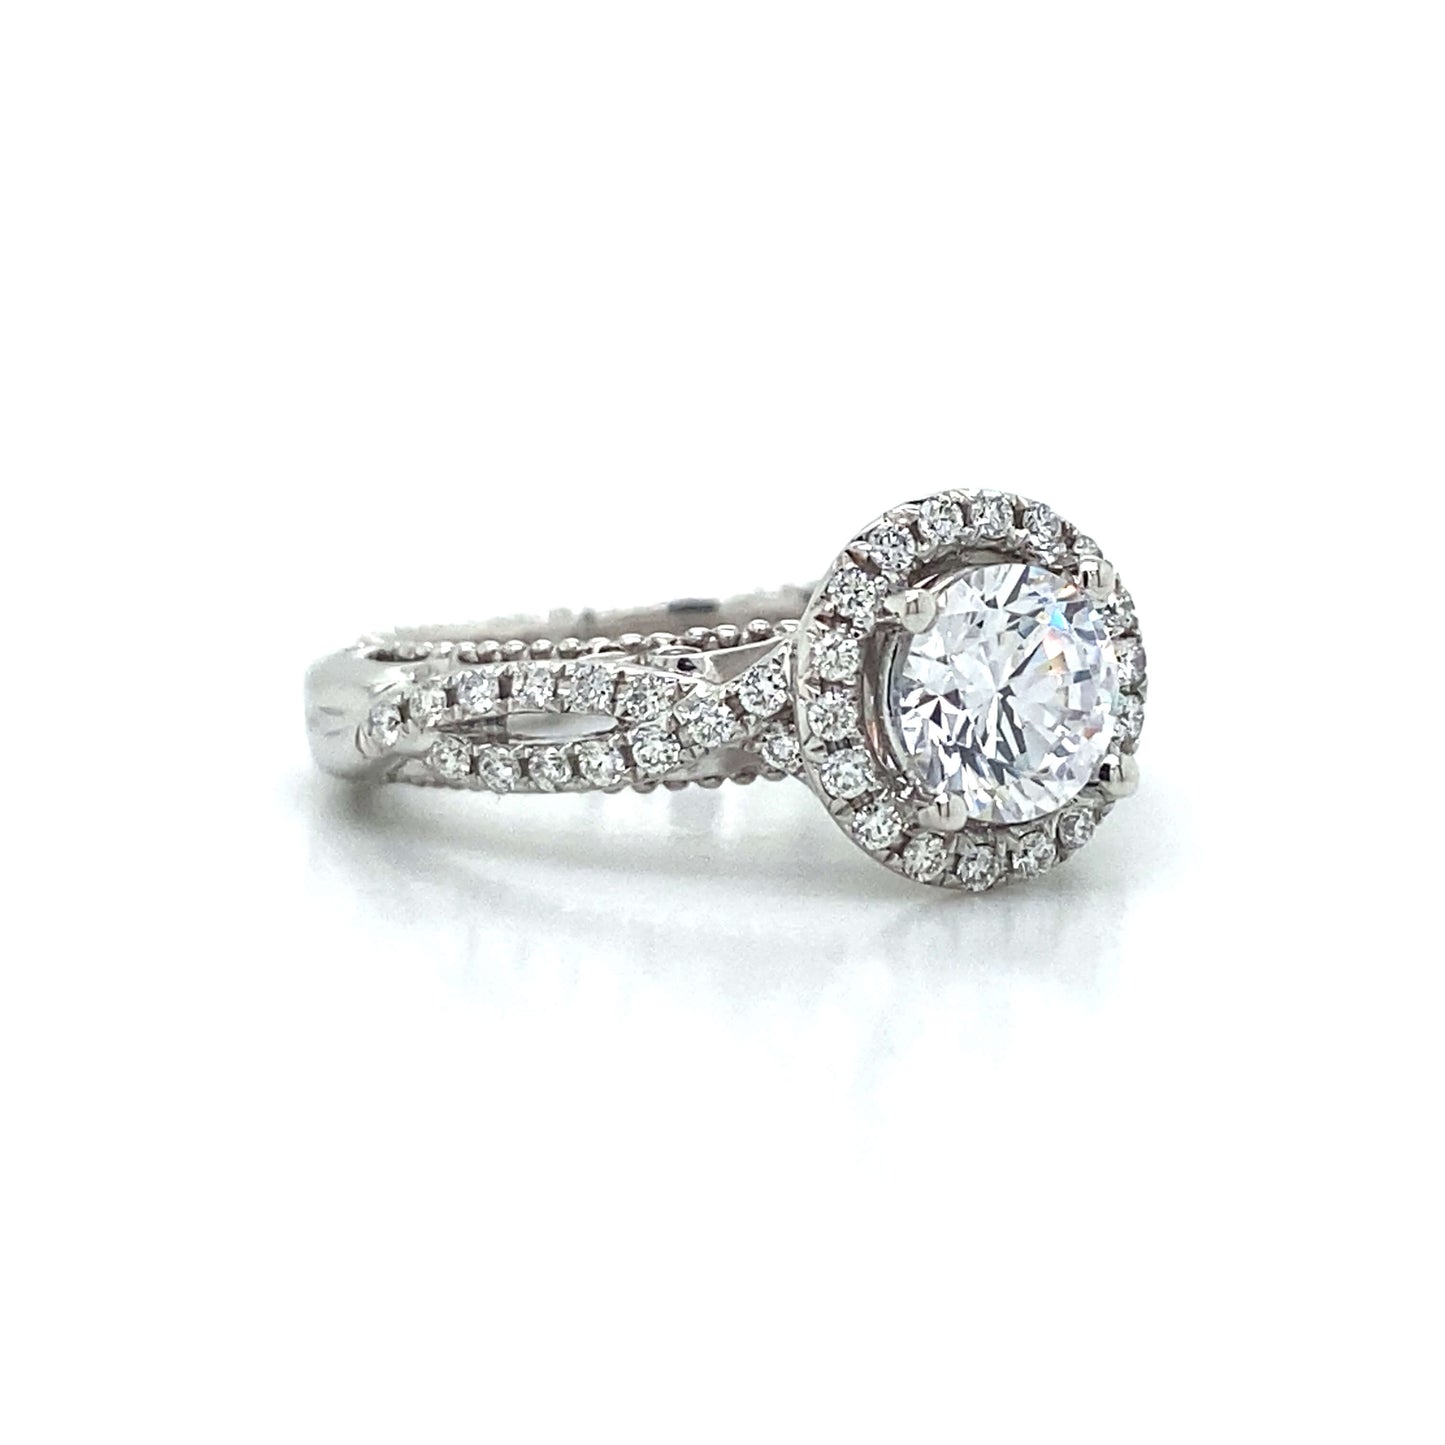 Verragio Halo Twisted Shank Engagement Ring in 18K White Gold